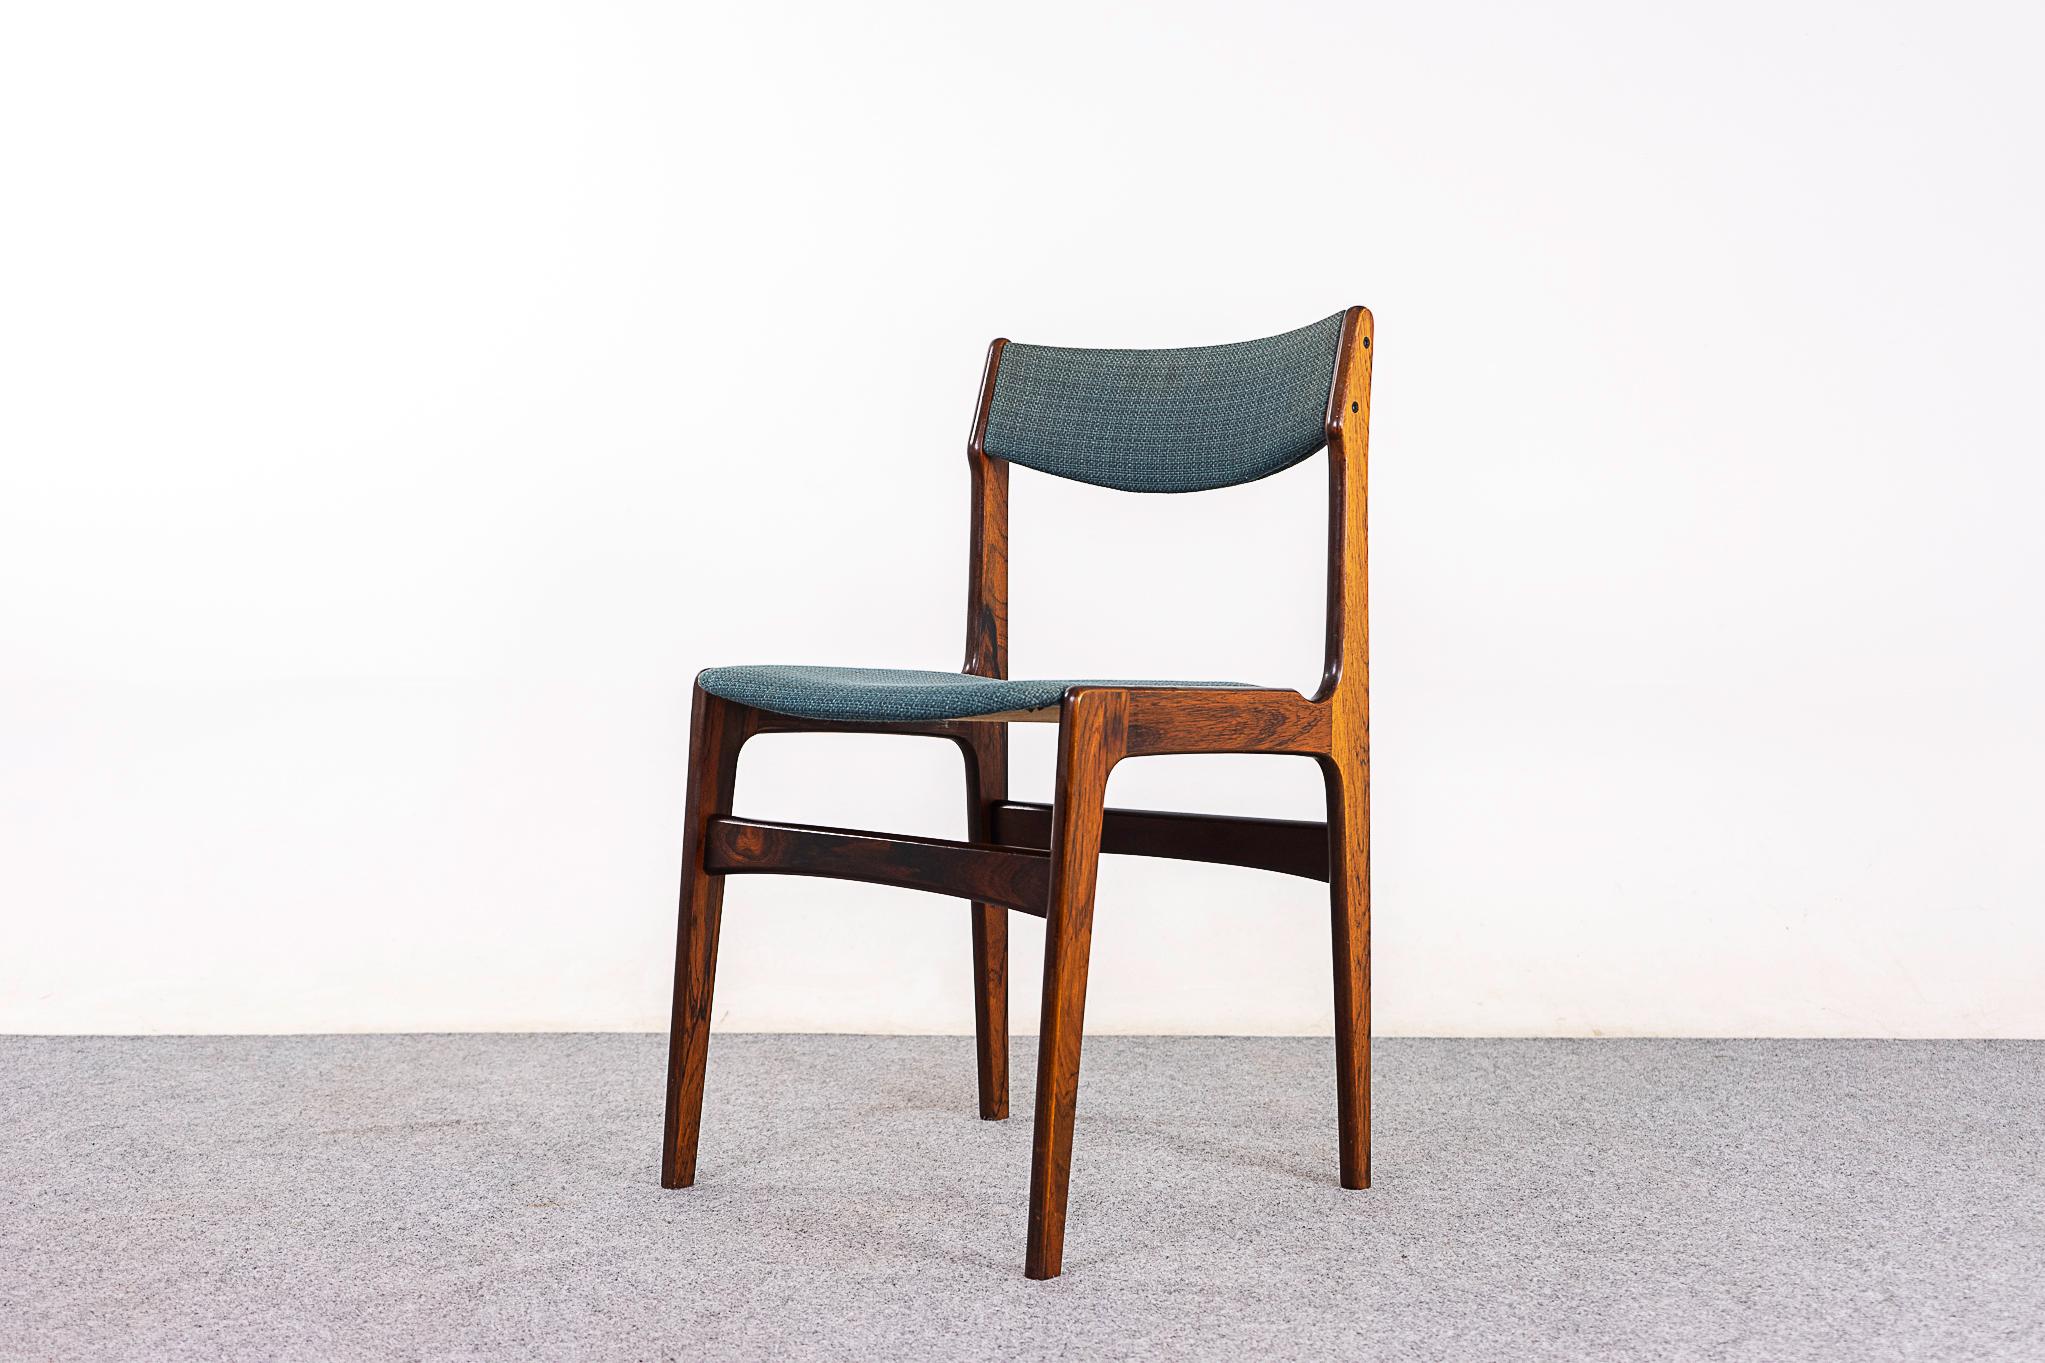 Rosewood mid-century dining chairs, circa 1960's. Lovely grain patterns on the veneer frames, sturdy, yet elegant. Beautifully curved backrests and generous seat size. Original fabric with significant wear, a perfect set for you to customize. Rare